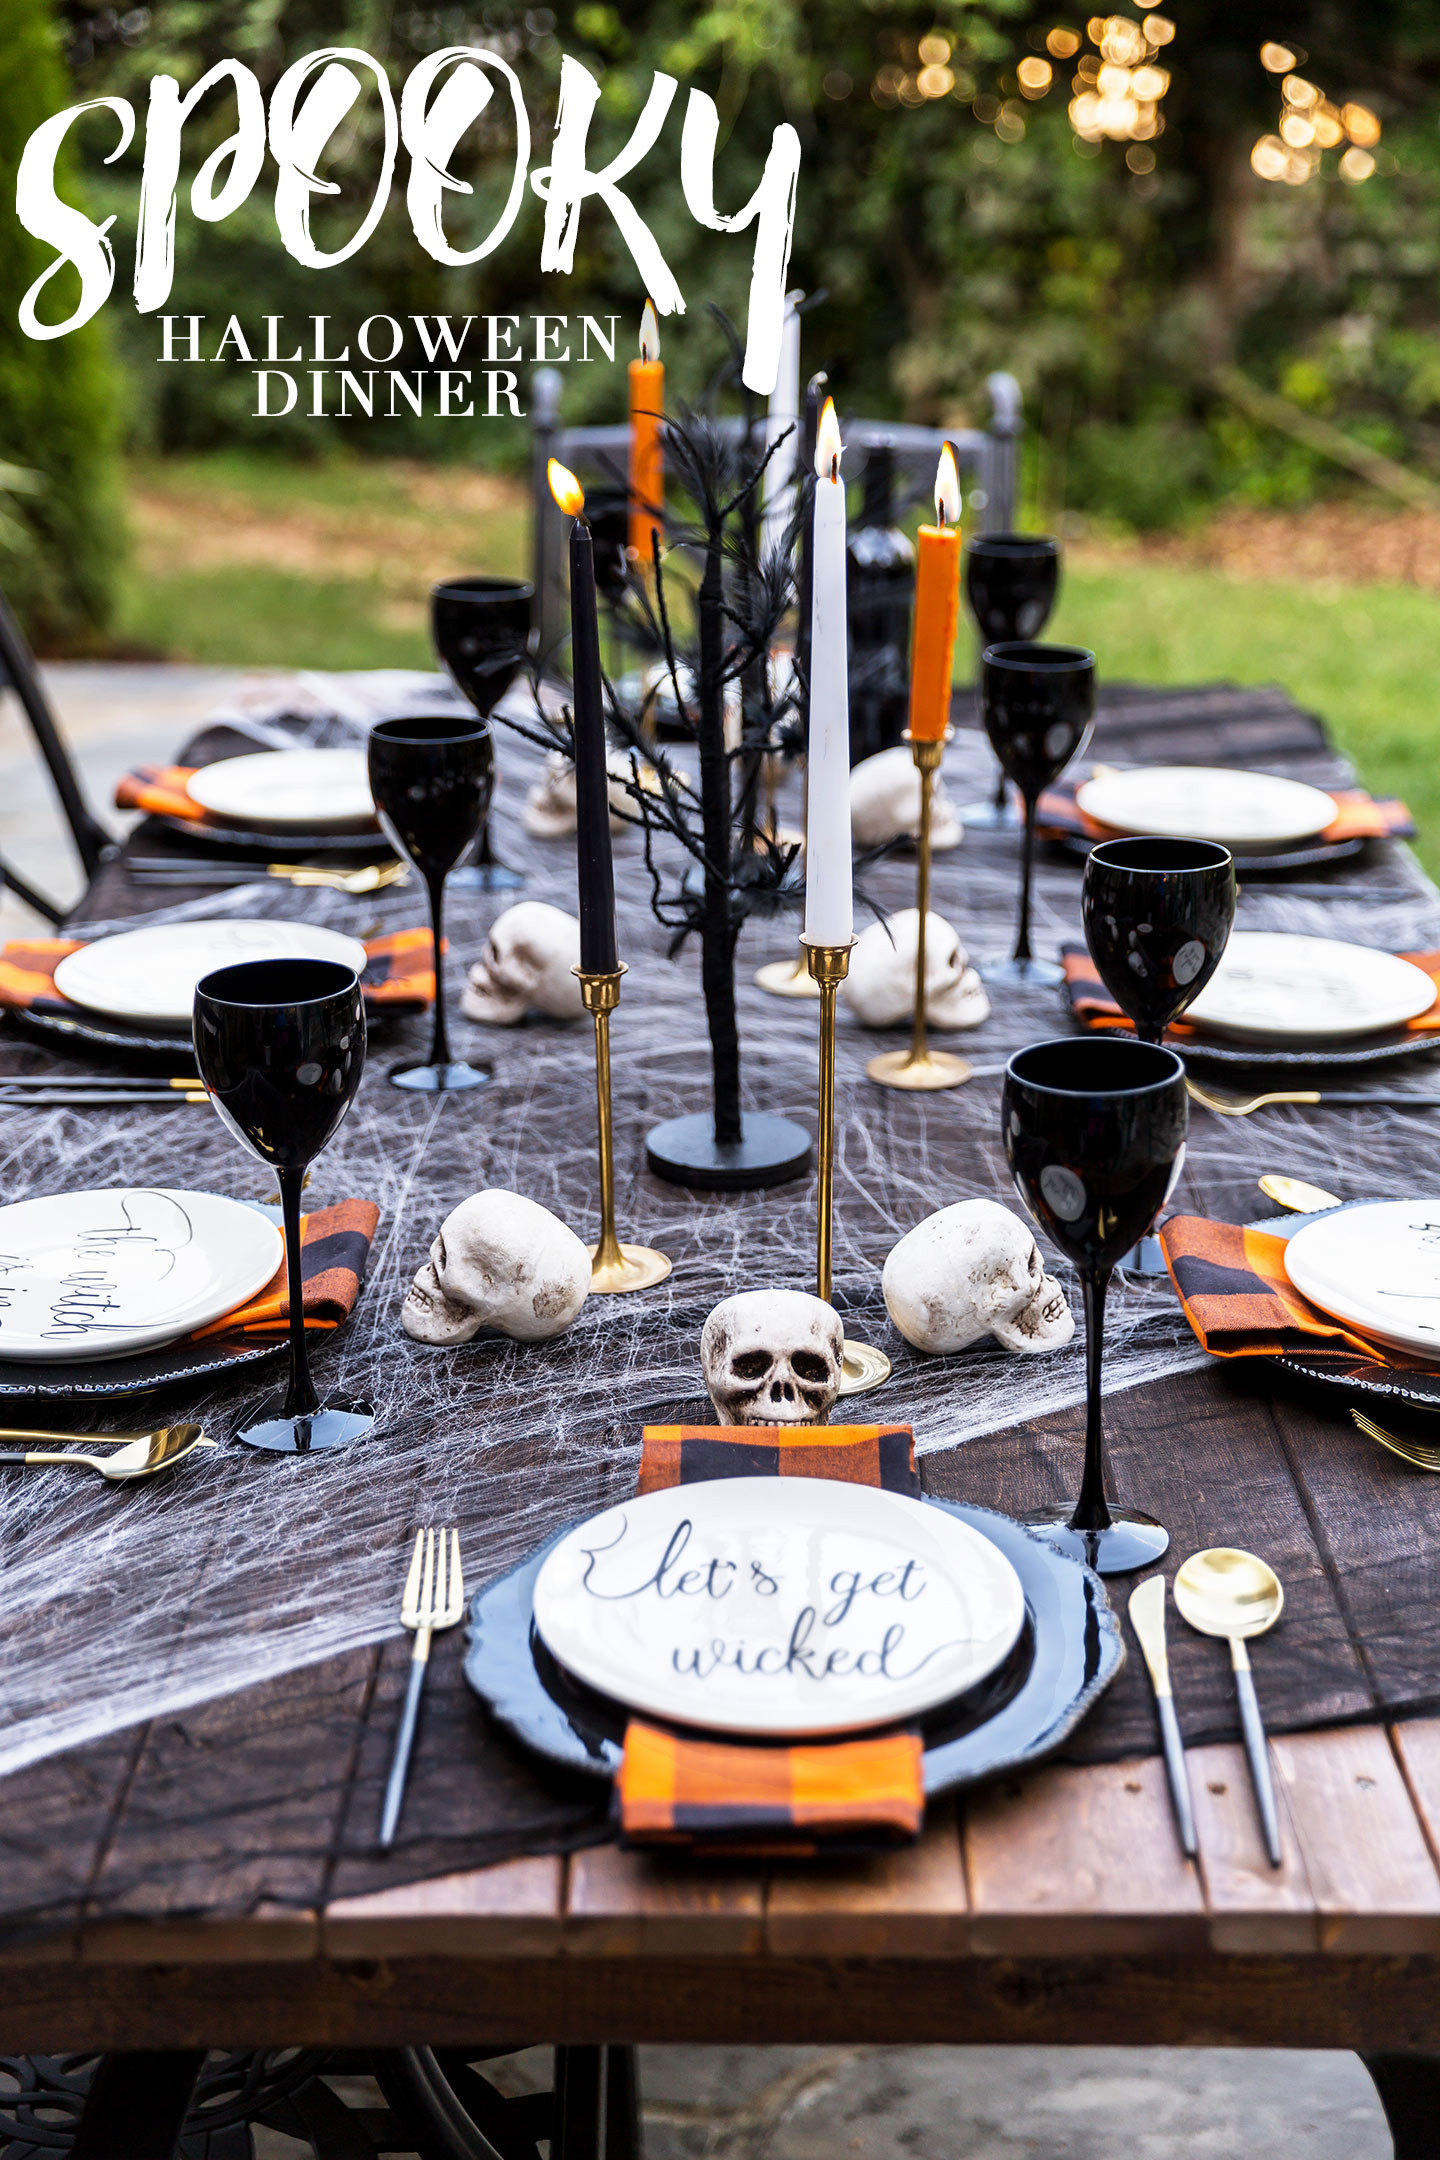 Fun Halloween Party Ideas For Adults
 Adult Halloween Party Decorations & Halloween Menu Ideas